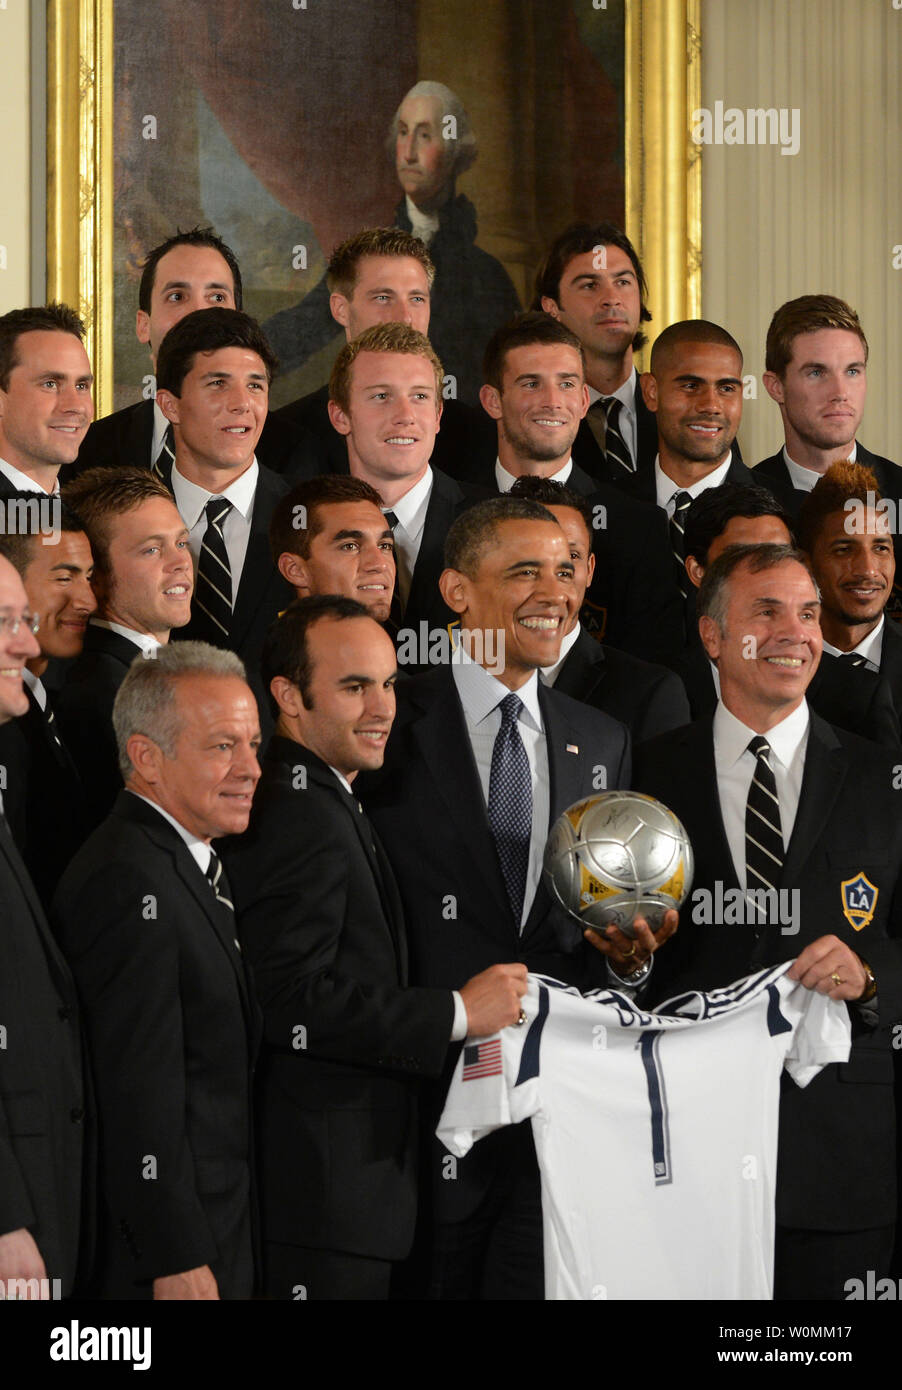 U.S. President Barack Obama holds LA Galaxy jersey along with the team under a portrait of President George Washington during during an East Room ceremony honoring players and coaches from the Major League Soccer (MLS) champions LA Galaxy and the Los Angeles National Hockey League (NHL) champions Los Angeles Kings at the White House in Washington, DC on March 26, 2013.  UPI/Pat Benic Stock Photo